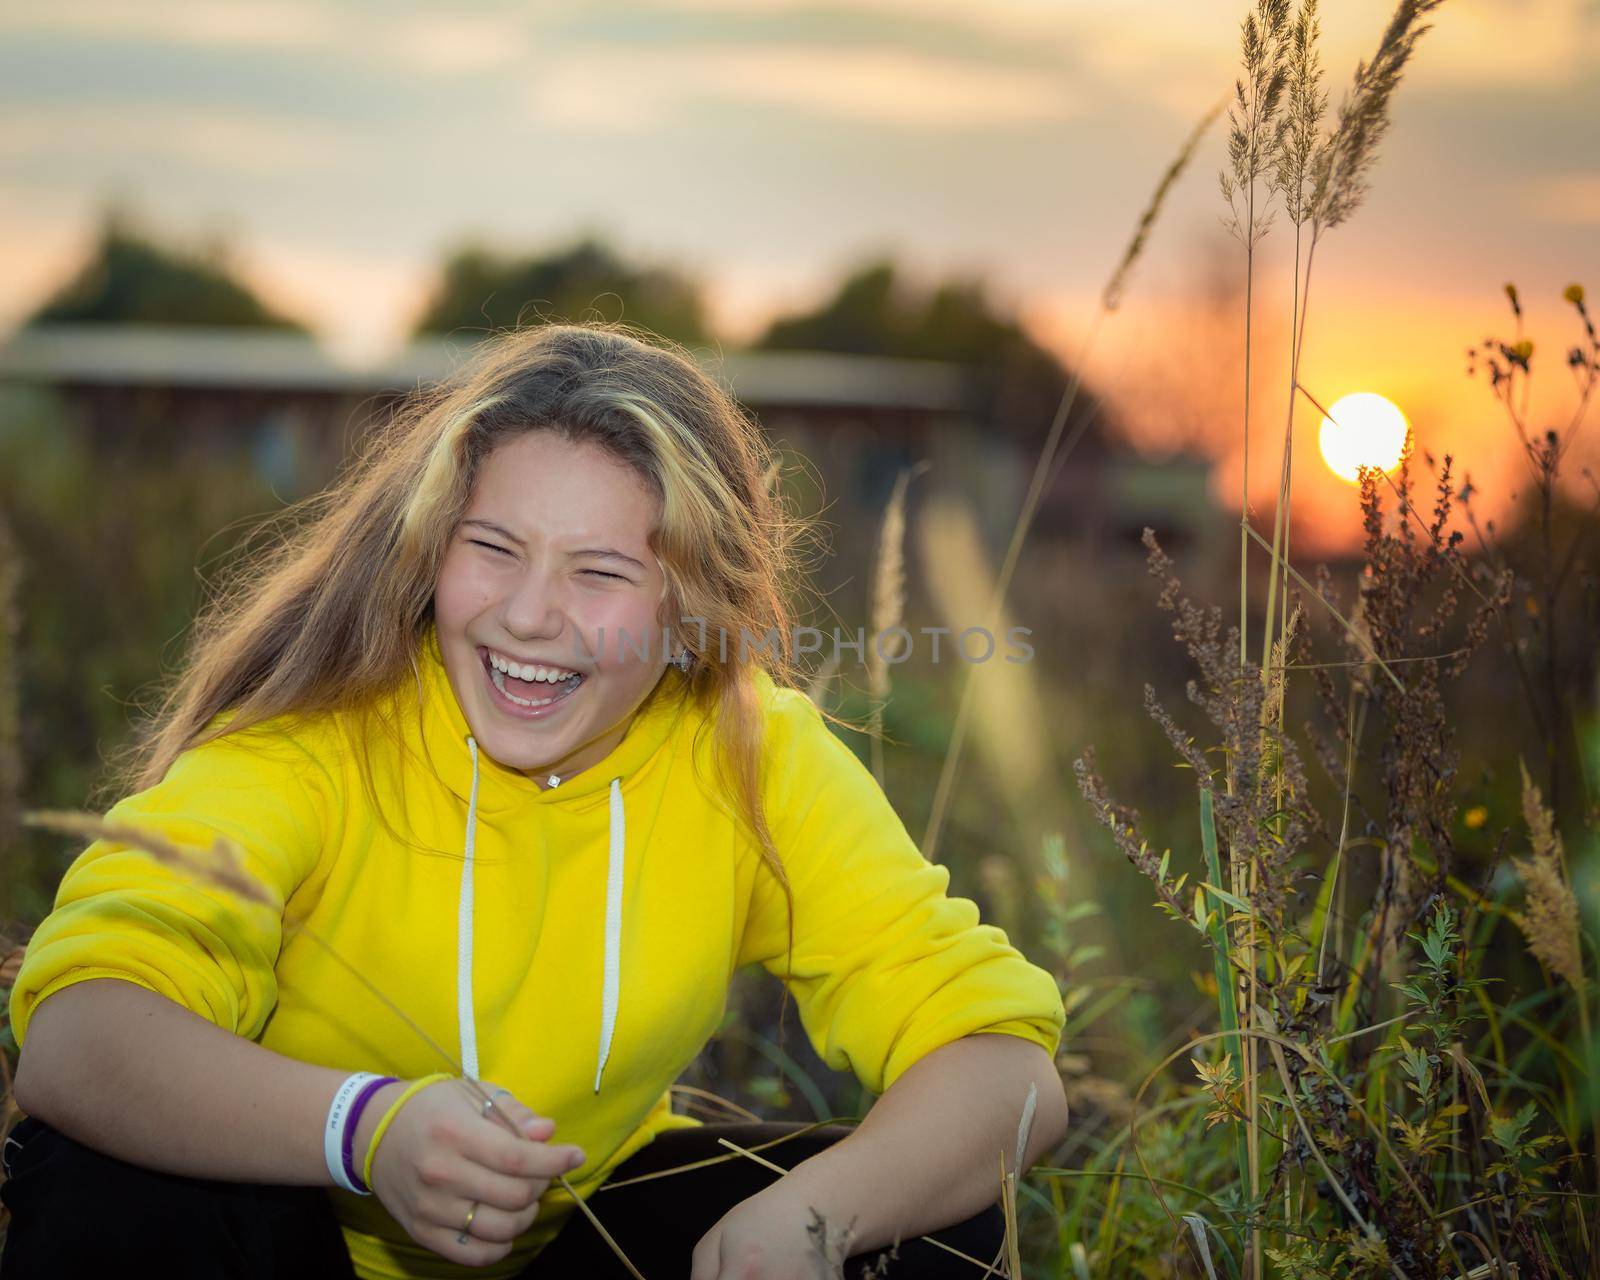 A young girl laughs in a meadow with tall grass in the rays of the setting sun by Yurich32